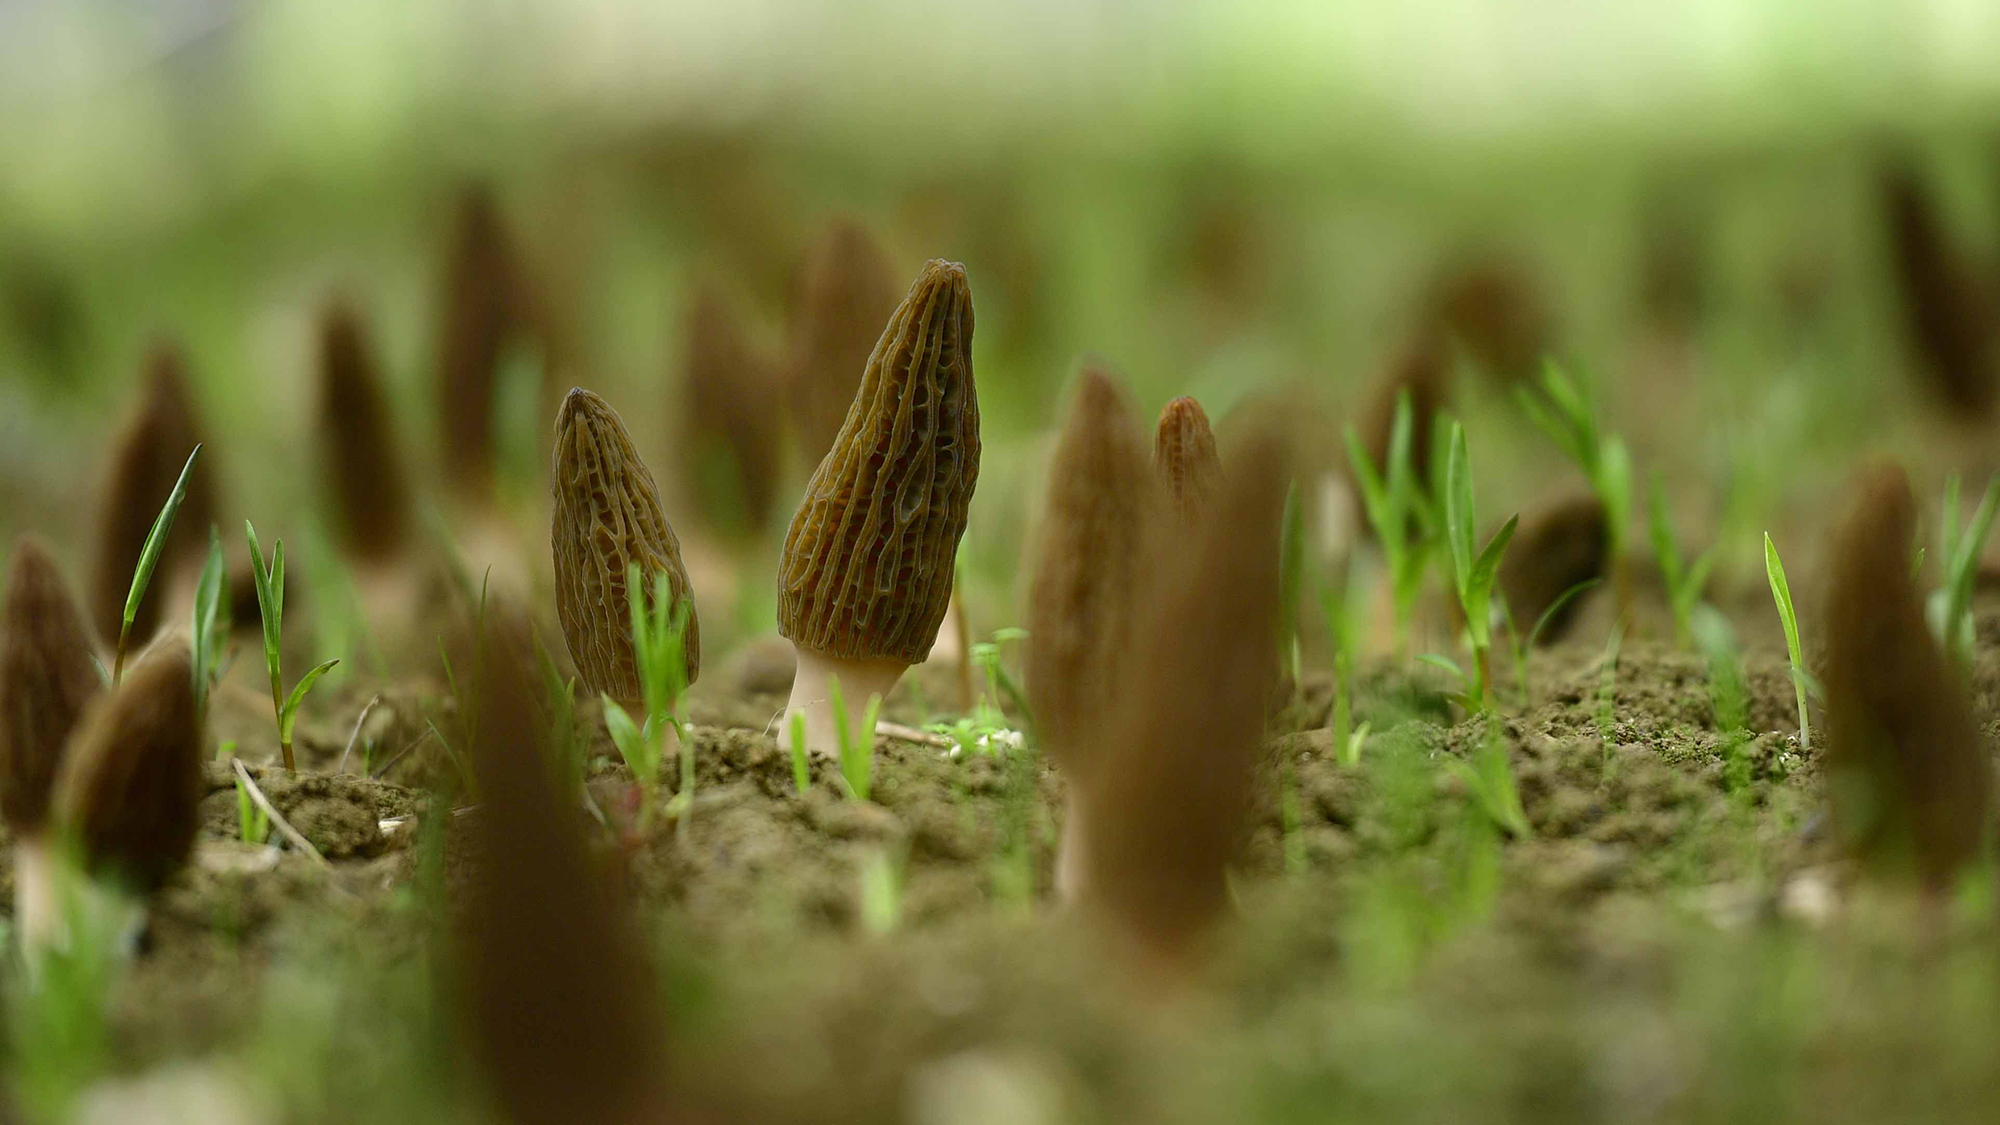 Morel mushrooms growing in a greenhouse in central China's Hubei Province. The mushrooms have long brown caps and white stems.